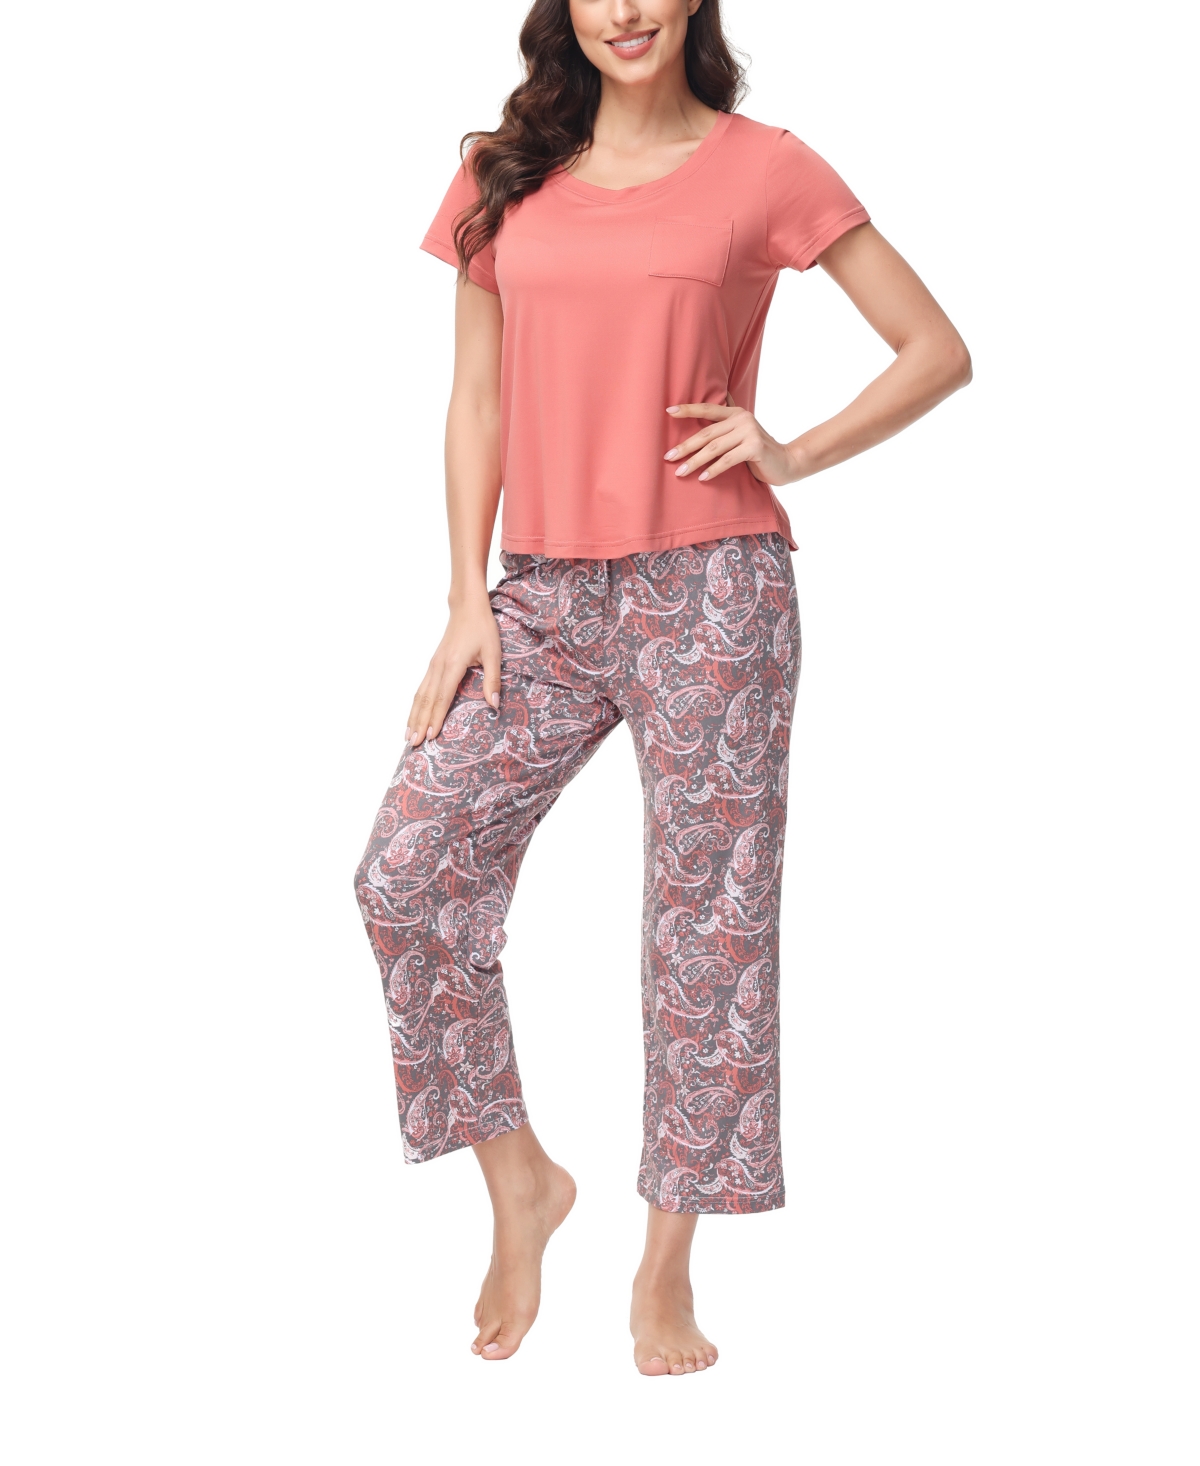 Women's 2 Piece Short Sleeve Top with Cropped Wide Leg Pants Pajama Set - Sweet Calico